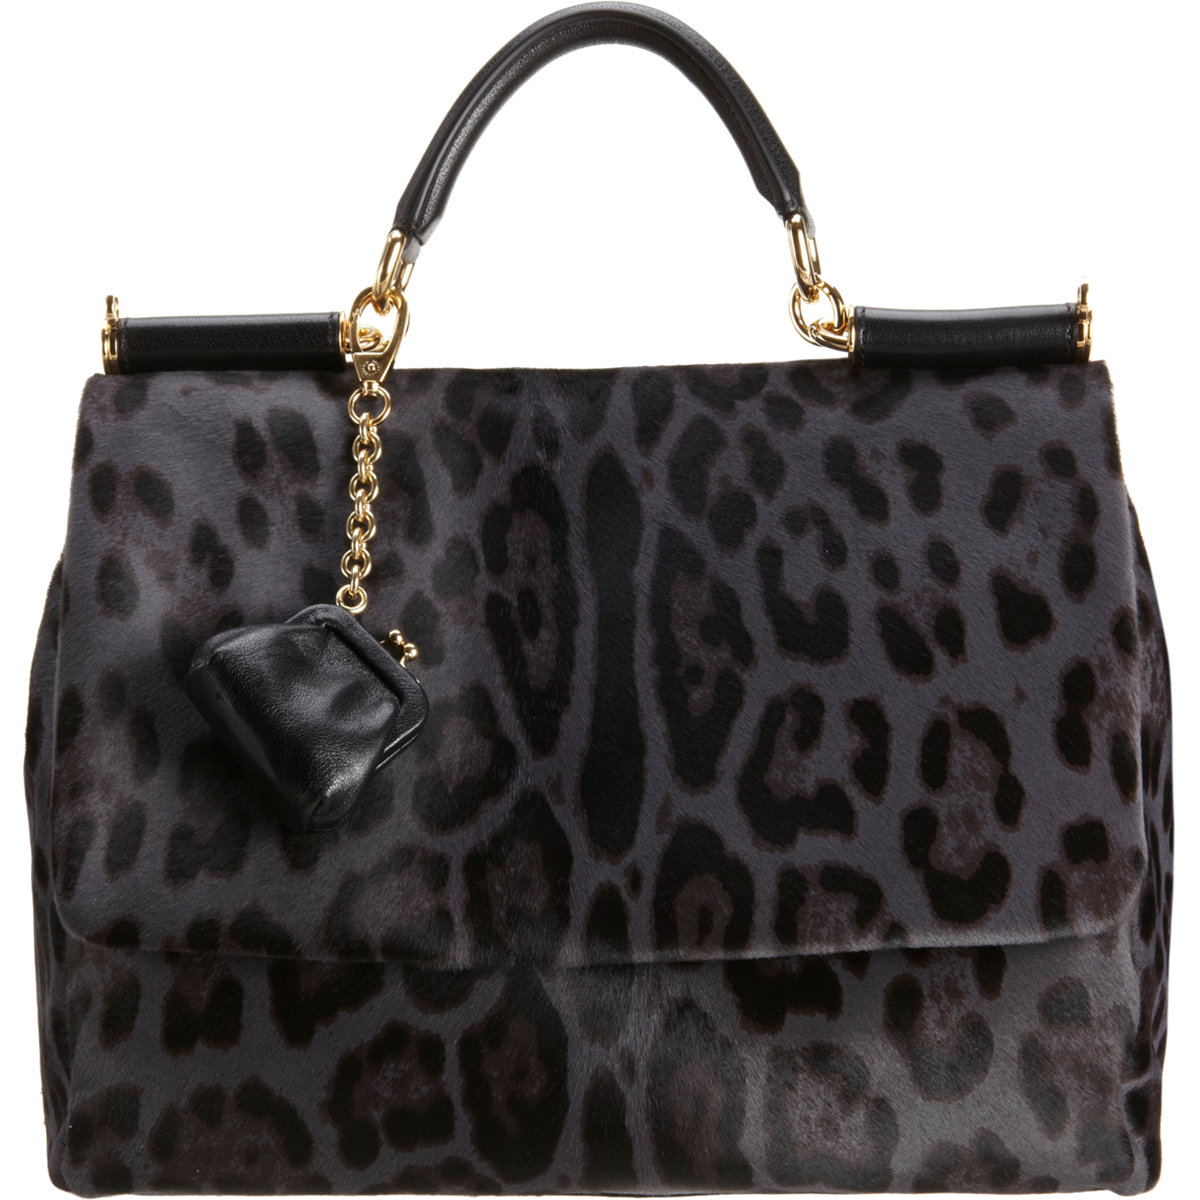 ICON BAGS: Sicily Bag by DOLCE & GABBANA